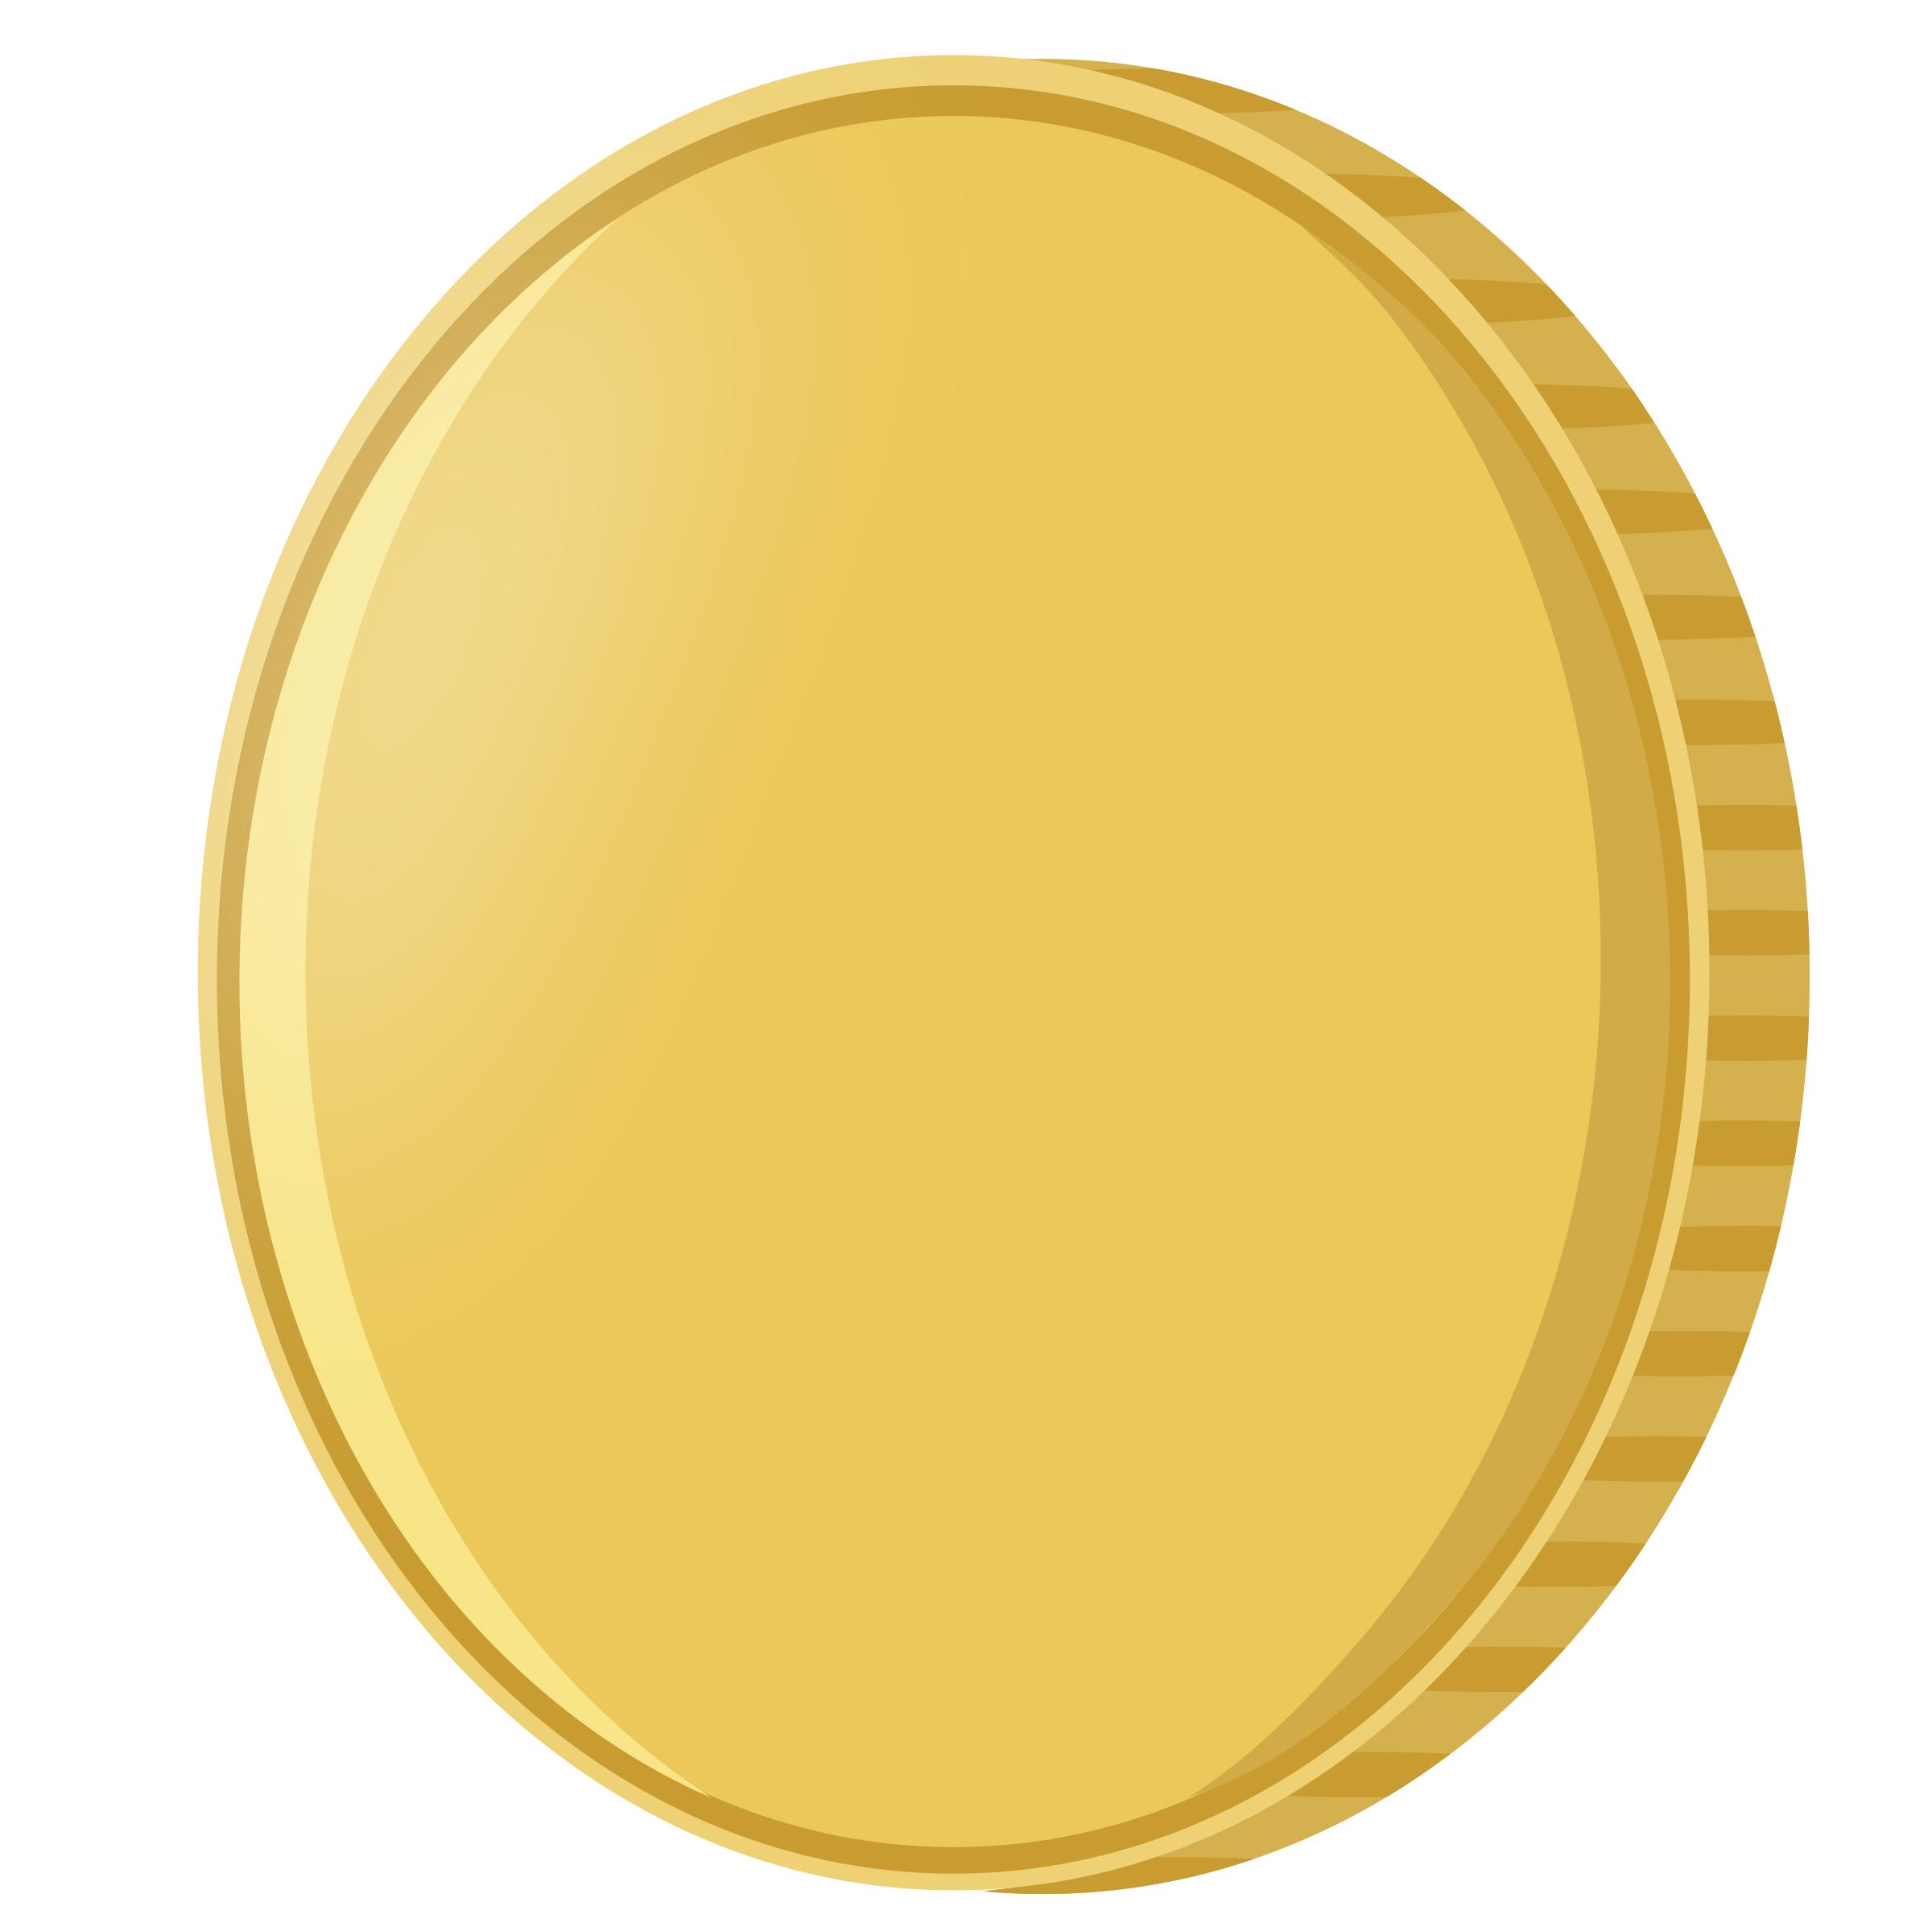 Spinning coin 6 png